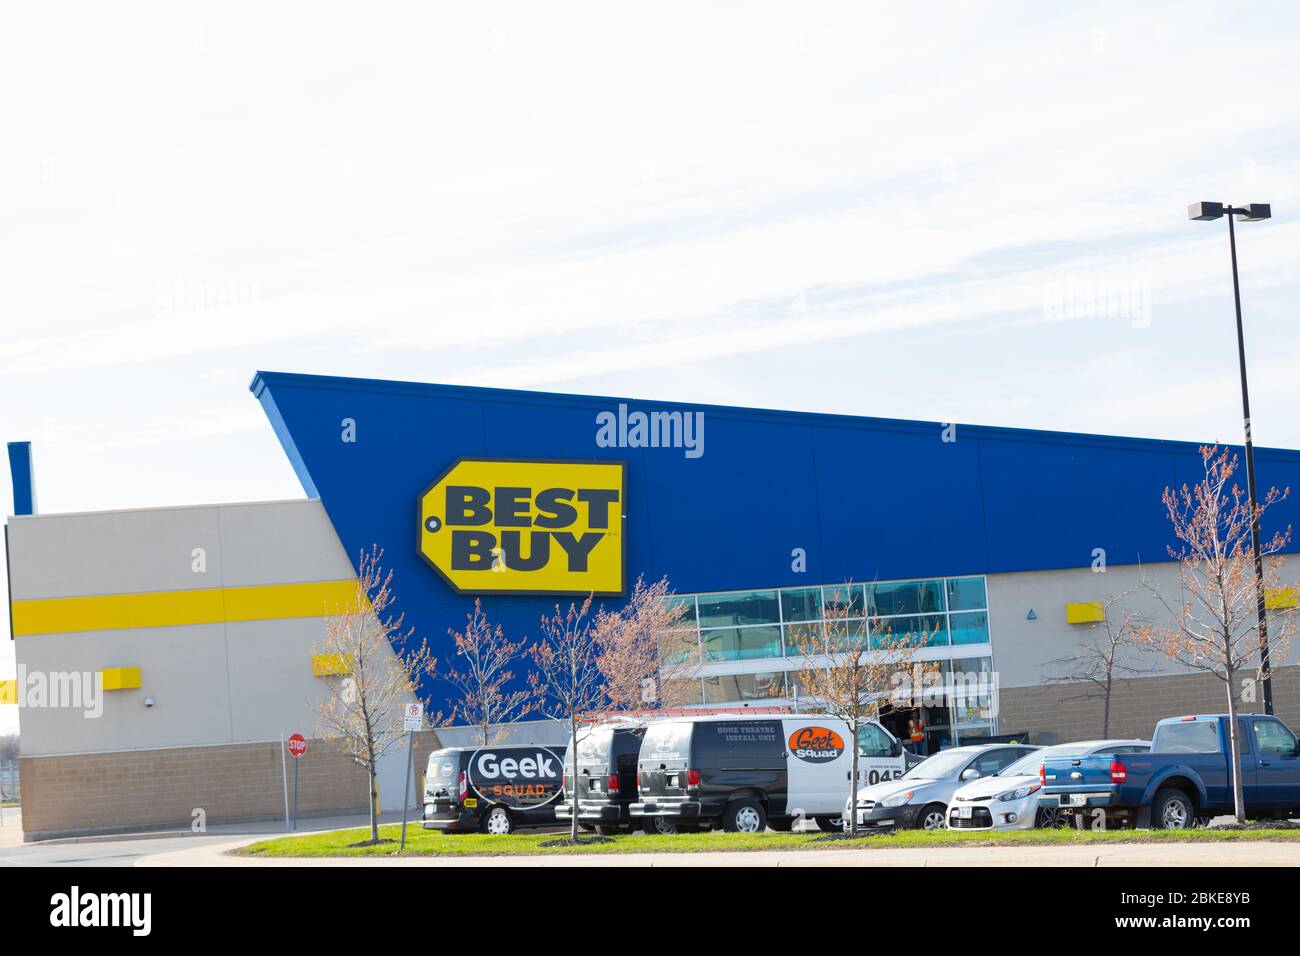 Best Buy storefront seen with the Geek Squad vehicles parked in the parking lot. Since covid19 pandemic most stores are closed. Stock Photo